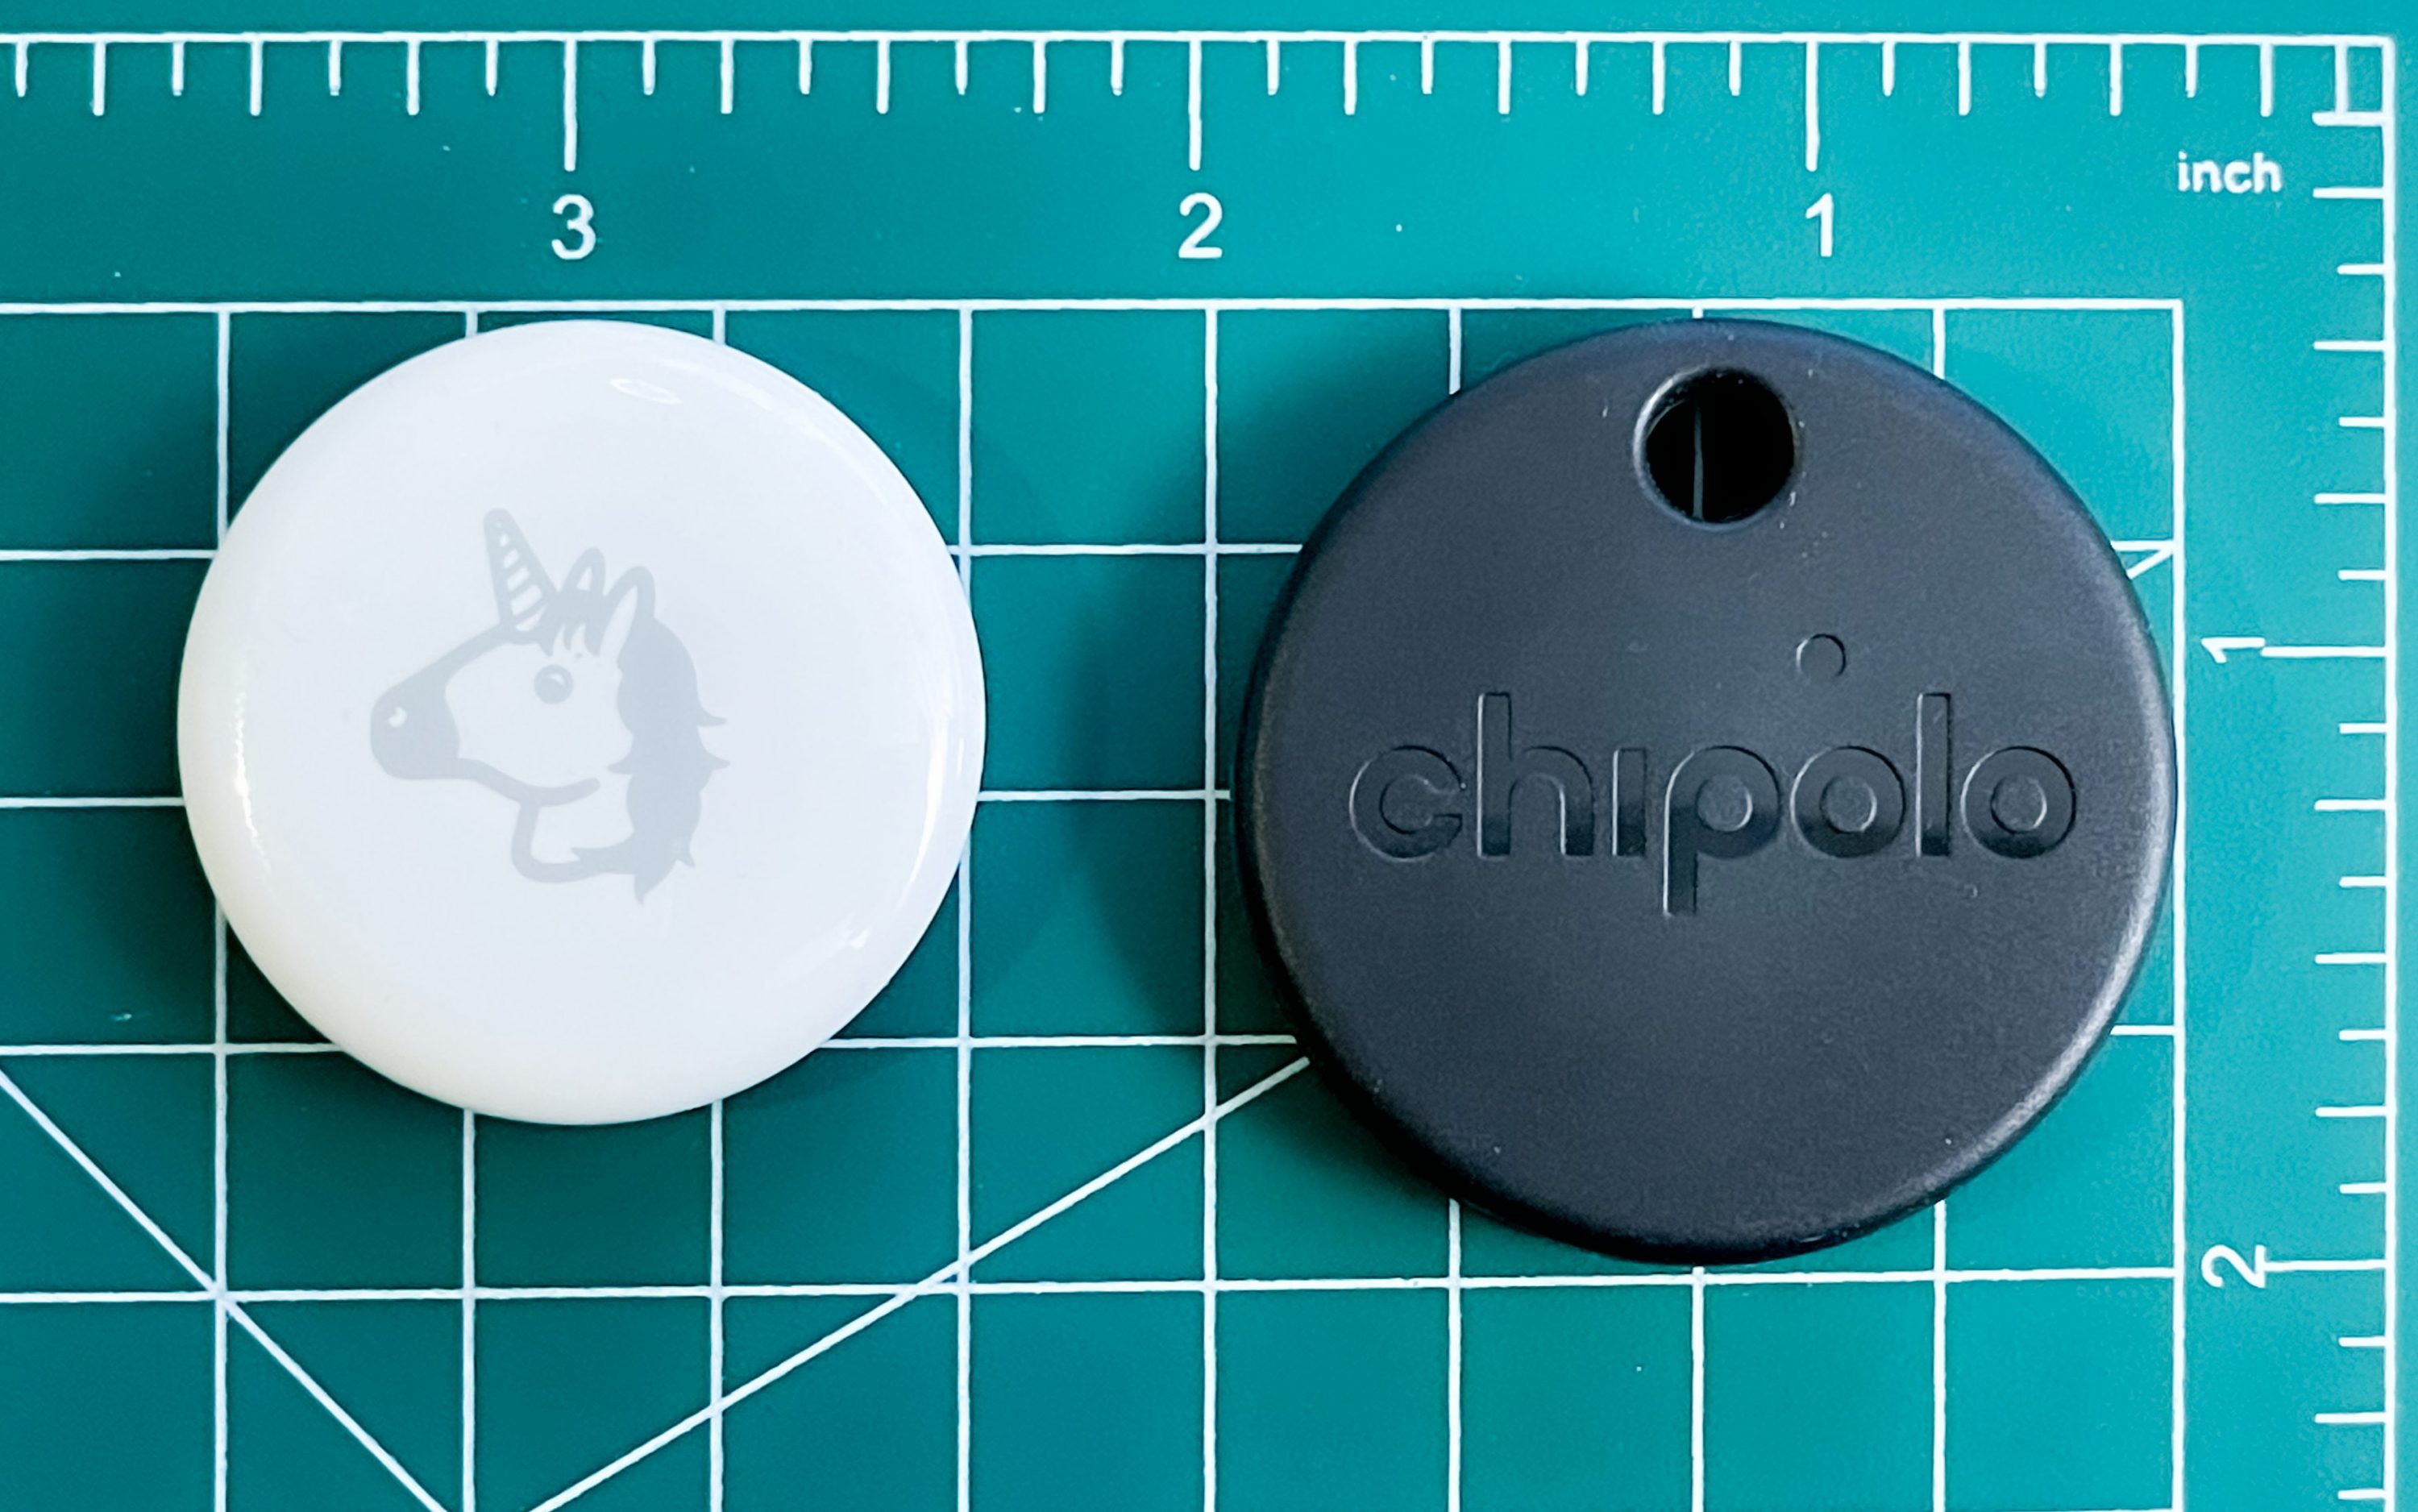 Chipolo ONE launching in June as the first third-party item